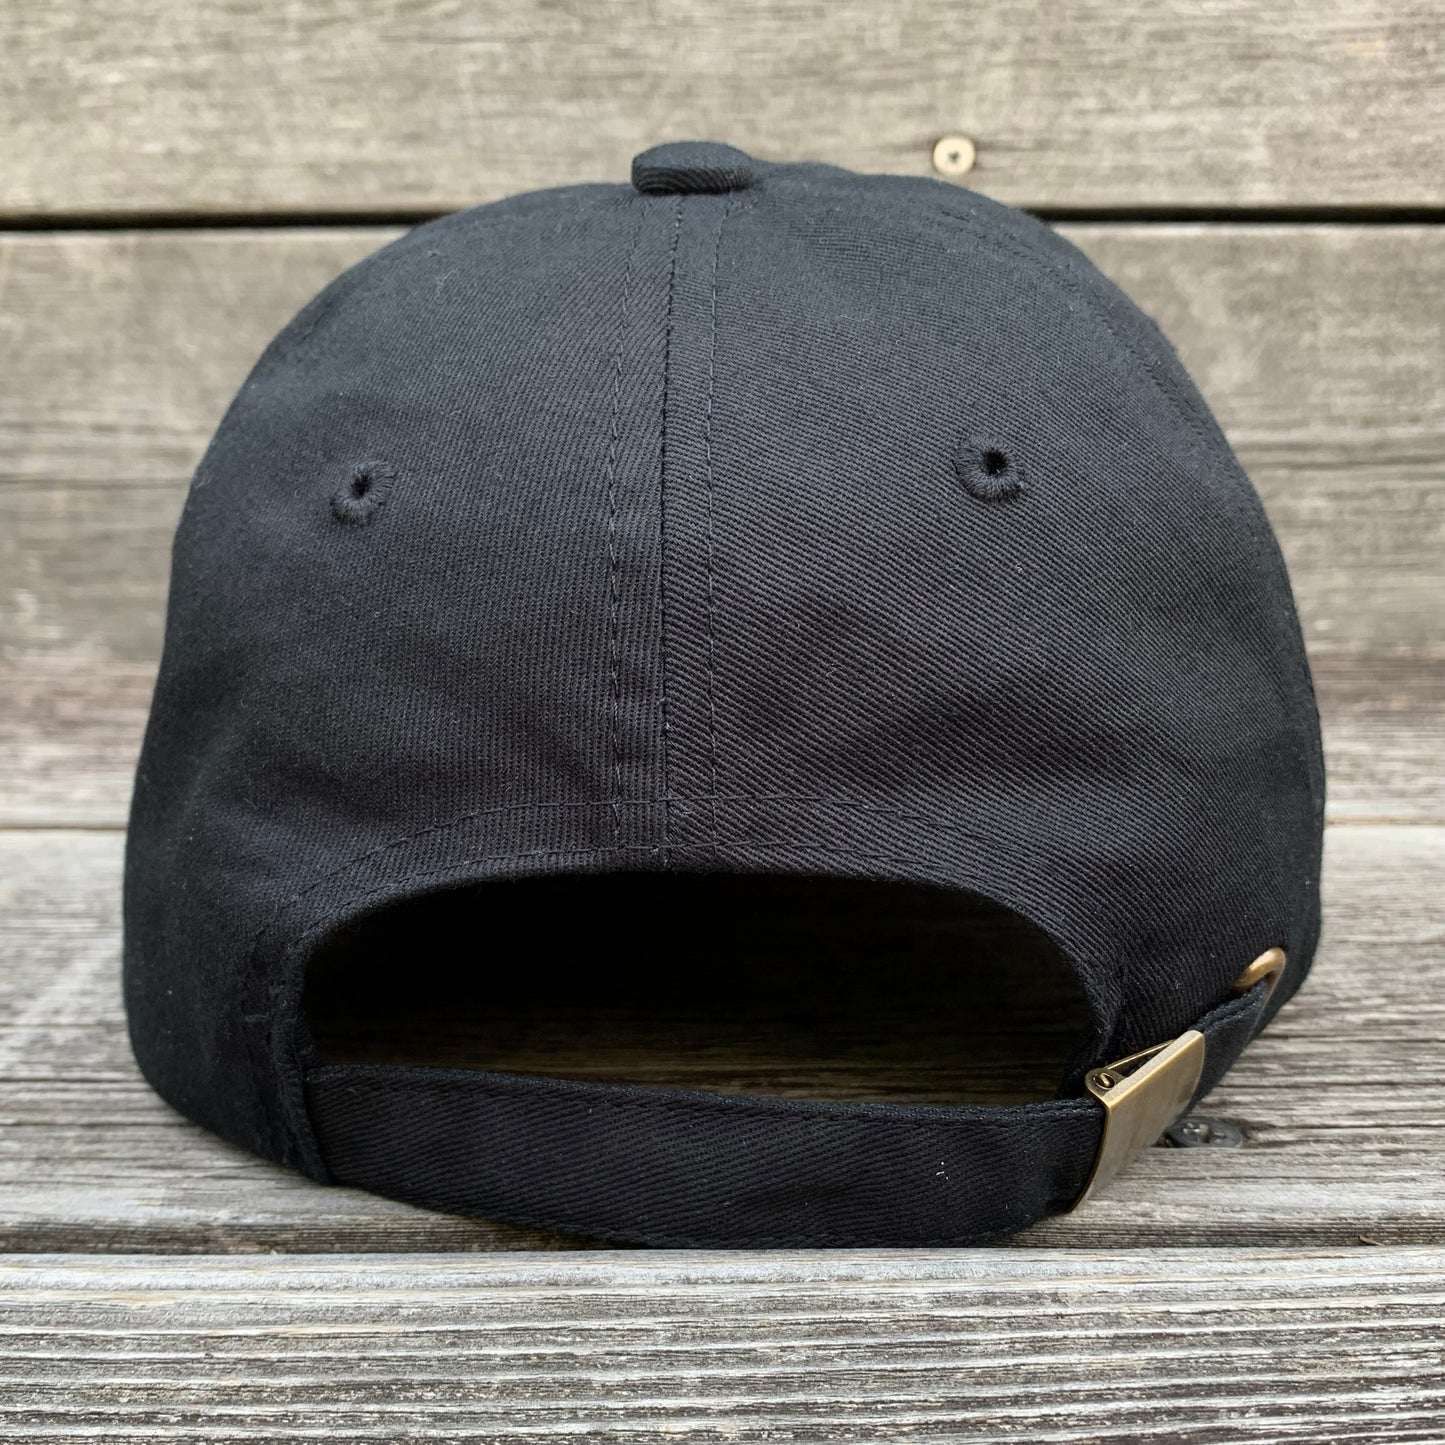 "hungry" Cap